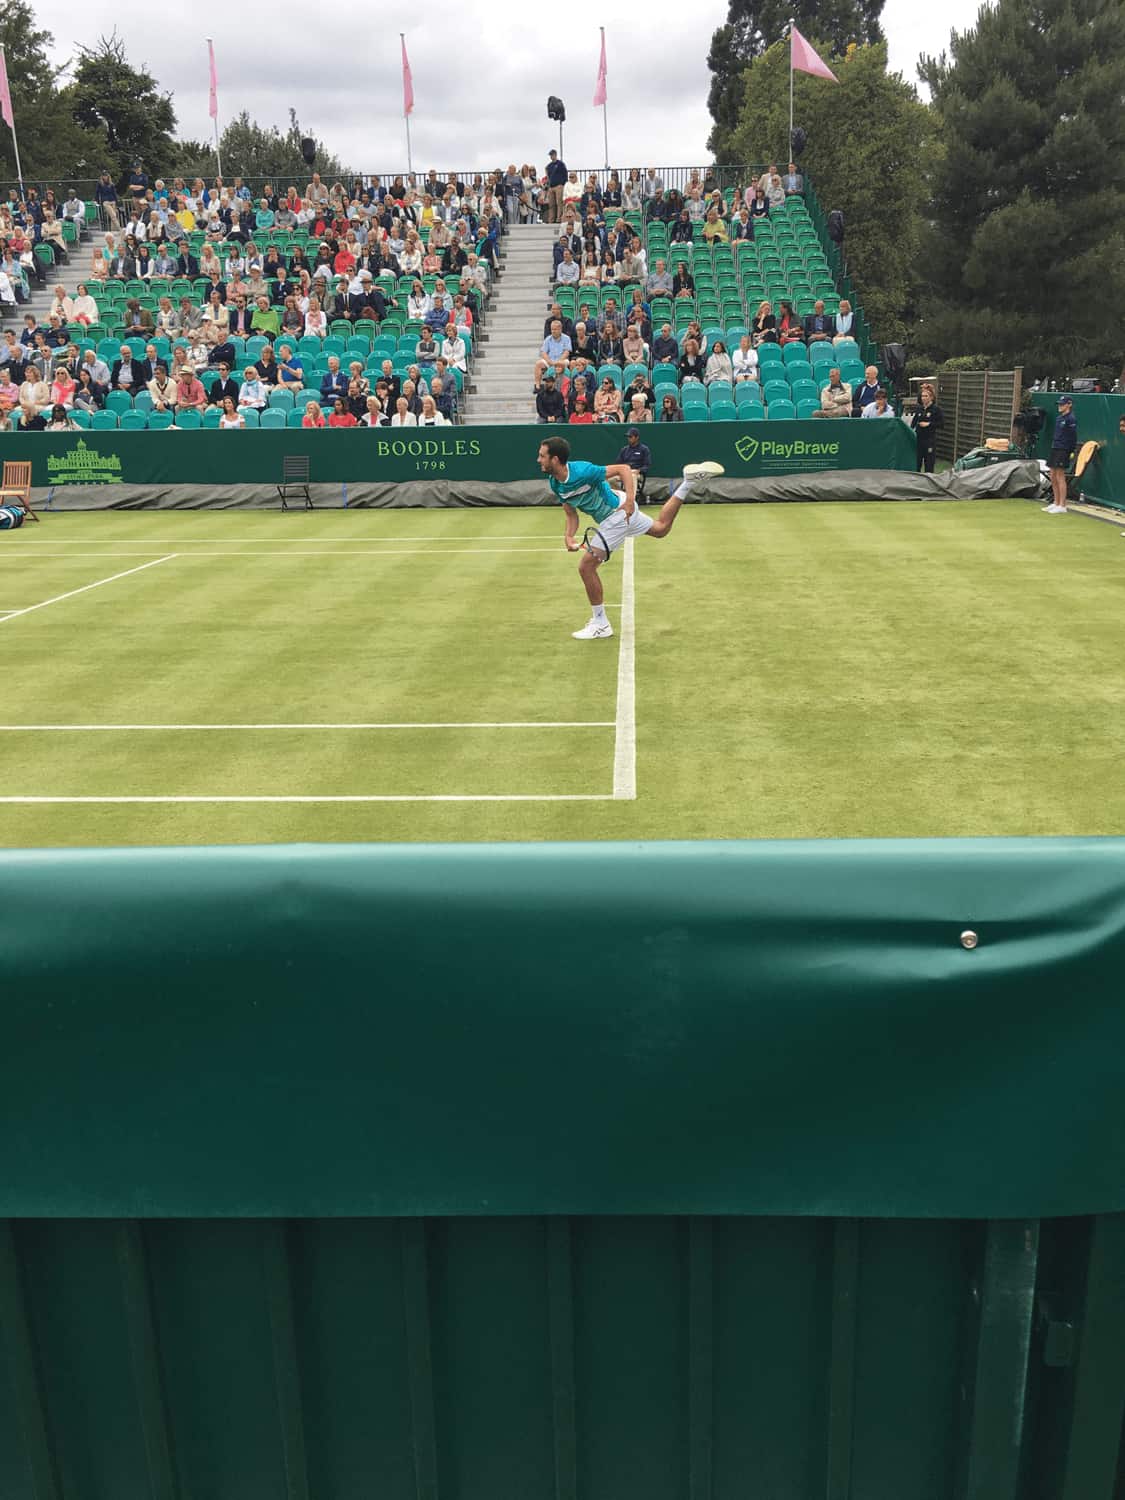 A tennis player in mid-action on a lush green court with a gallery watching in the background.